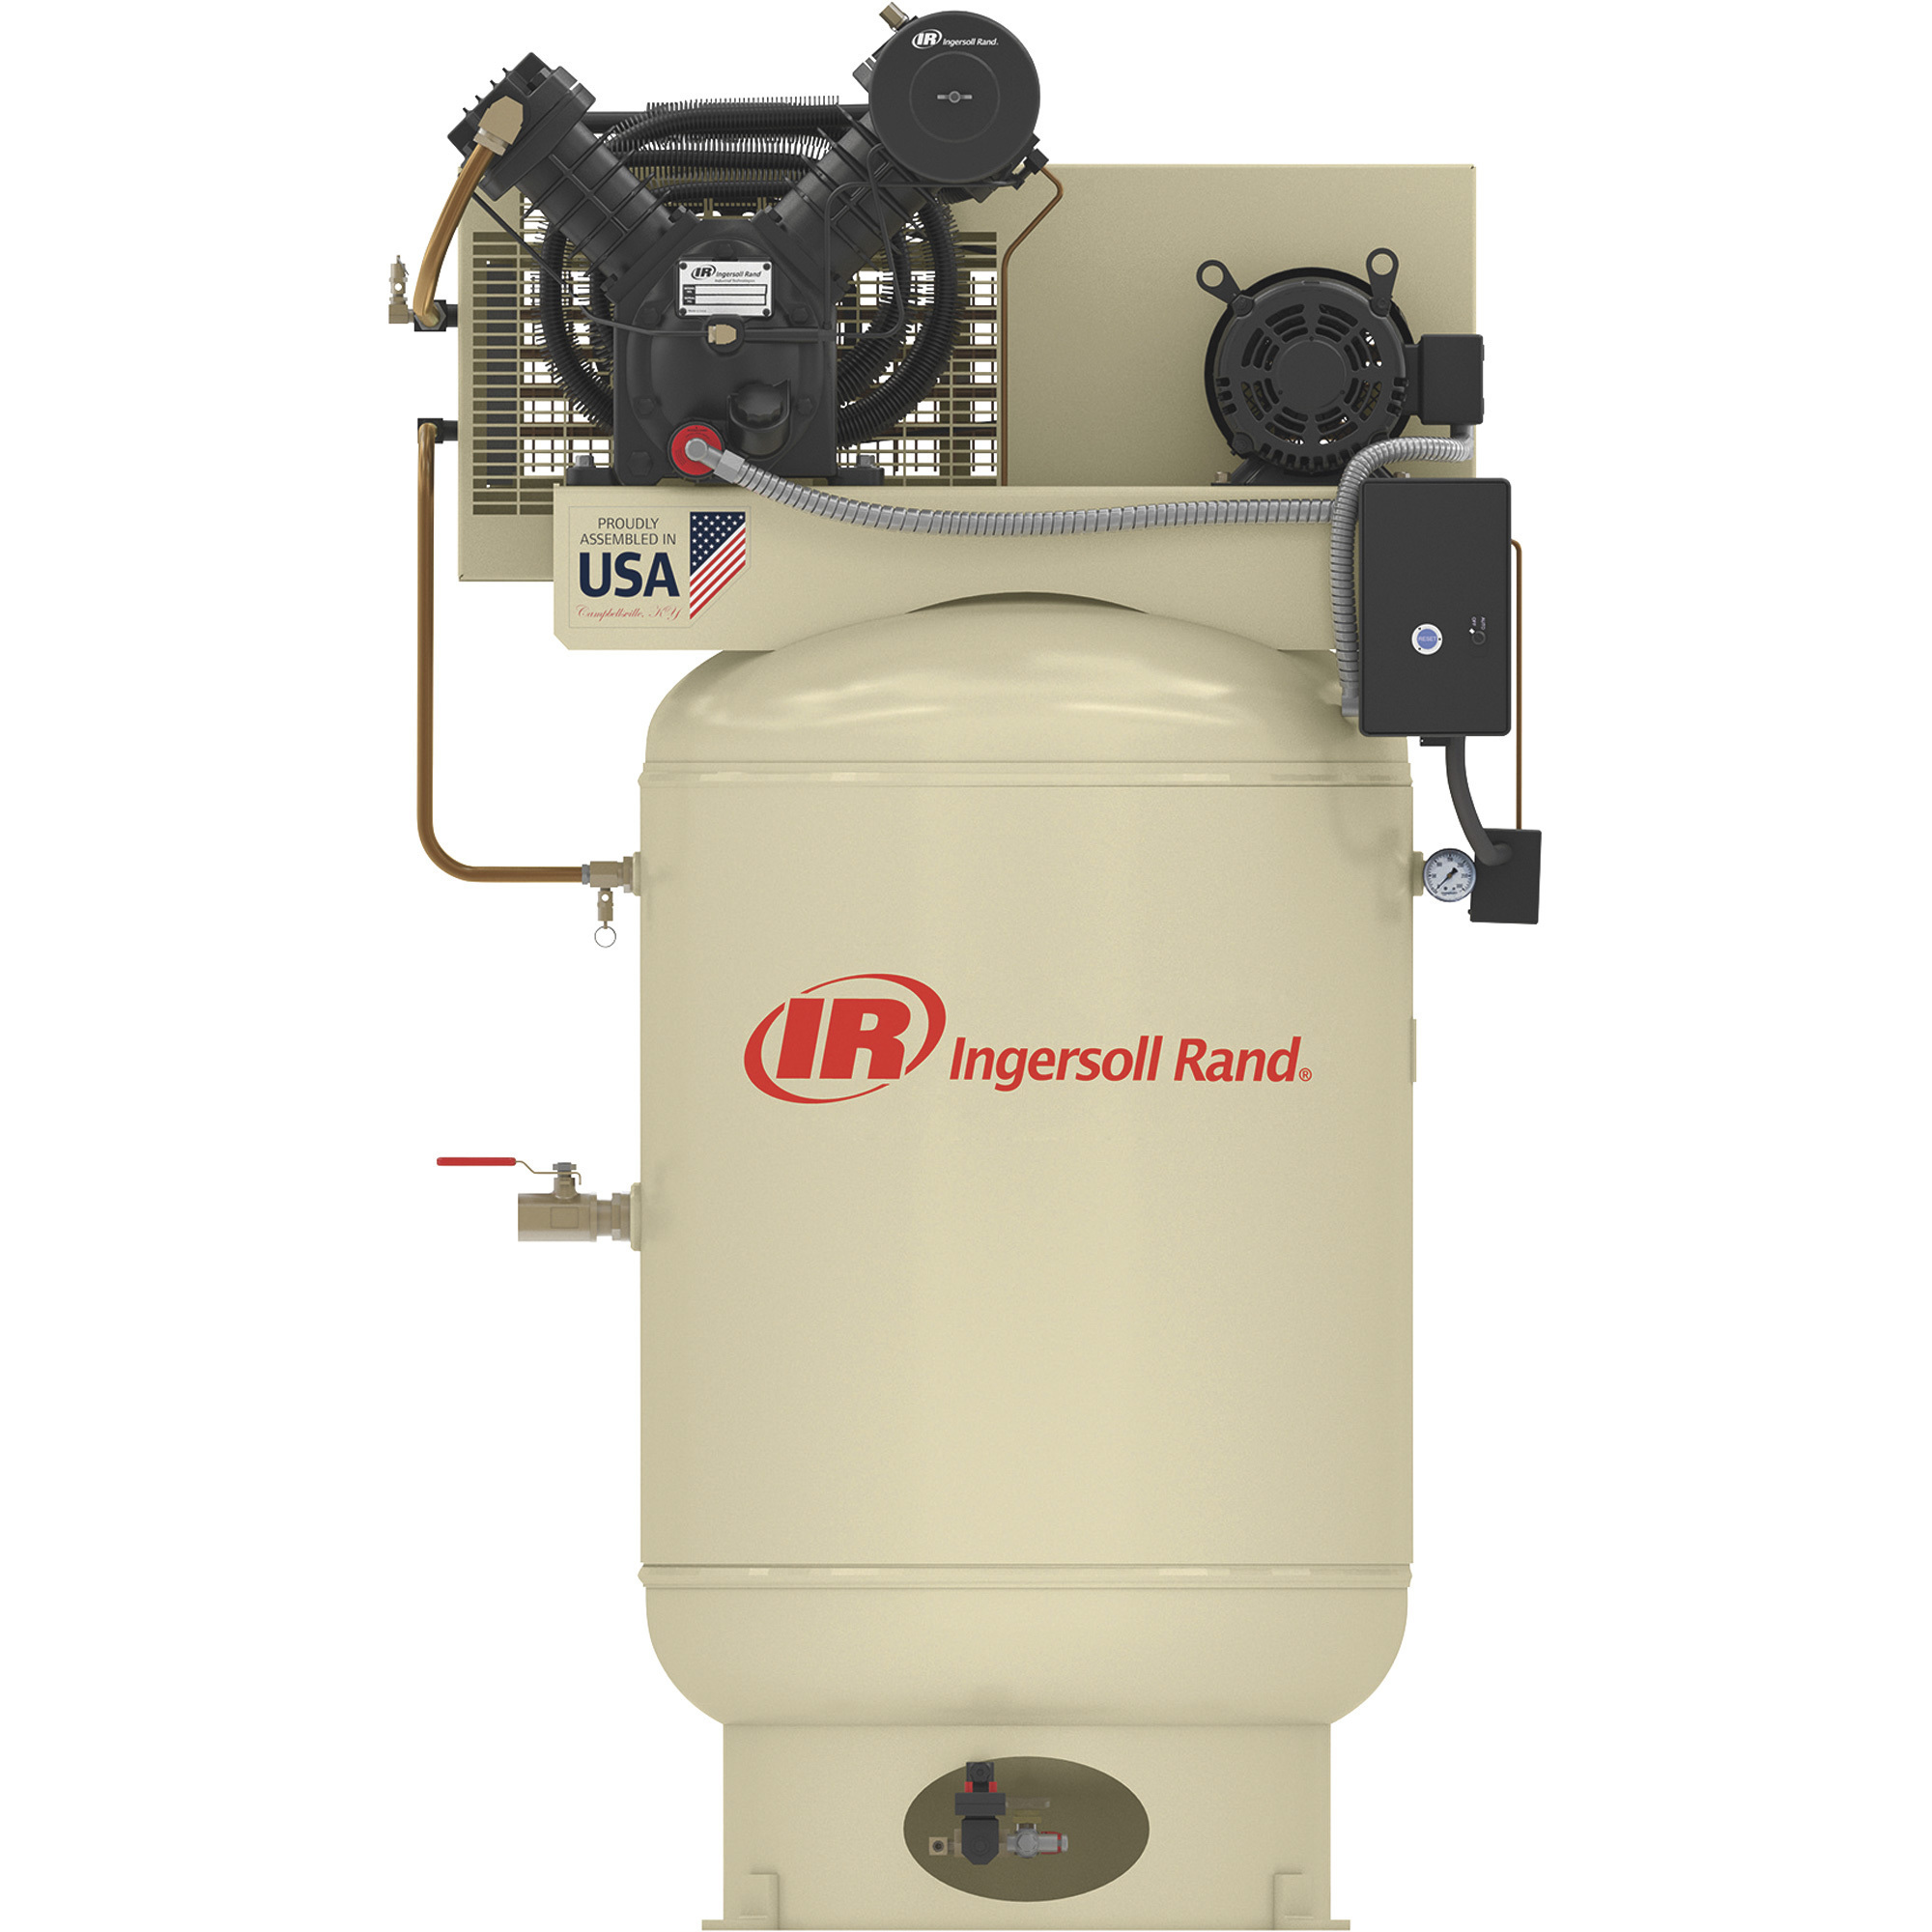 Ingersoll Rand Electric Stationary Air Compressor (Premium Package), 10 HP, 460 Volts, 3 Phase, 120 Gallon Vertical, 35 CFM At 175 PSI, Model 2545K10-